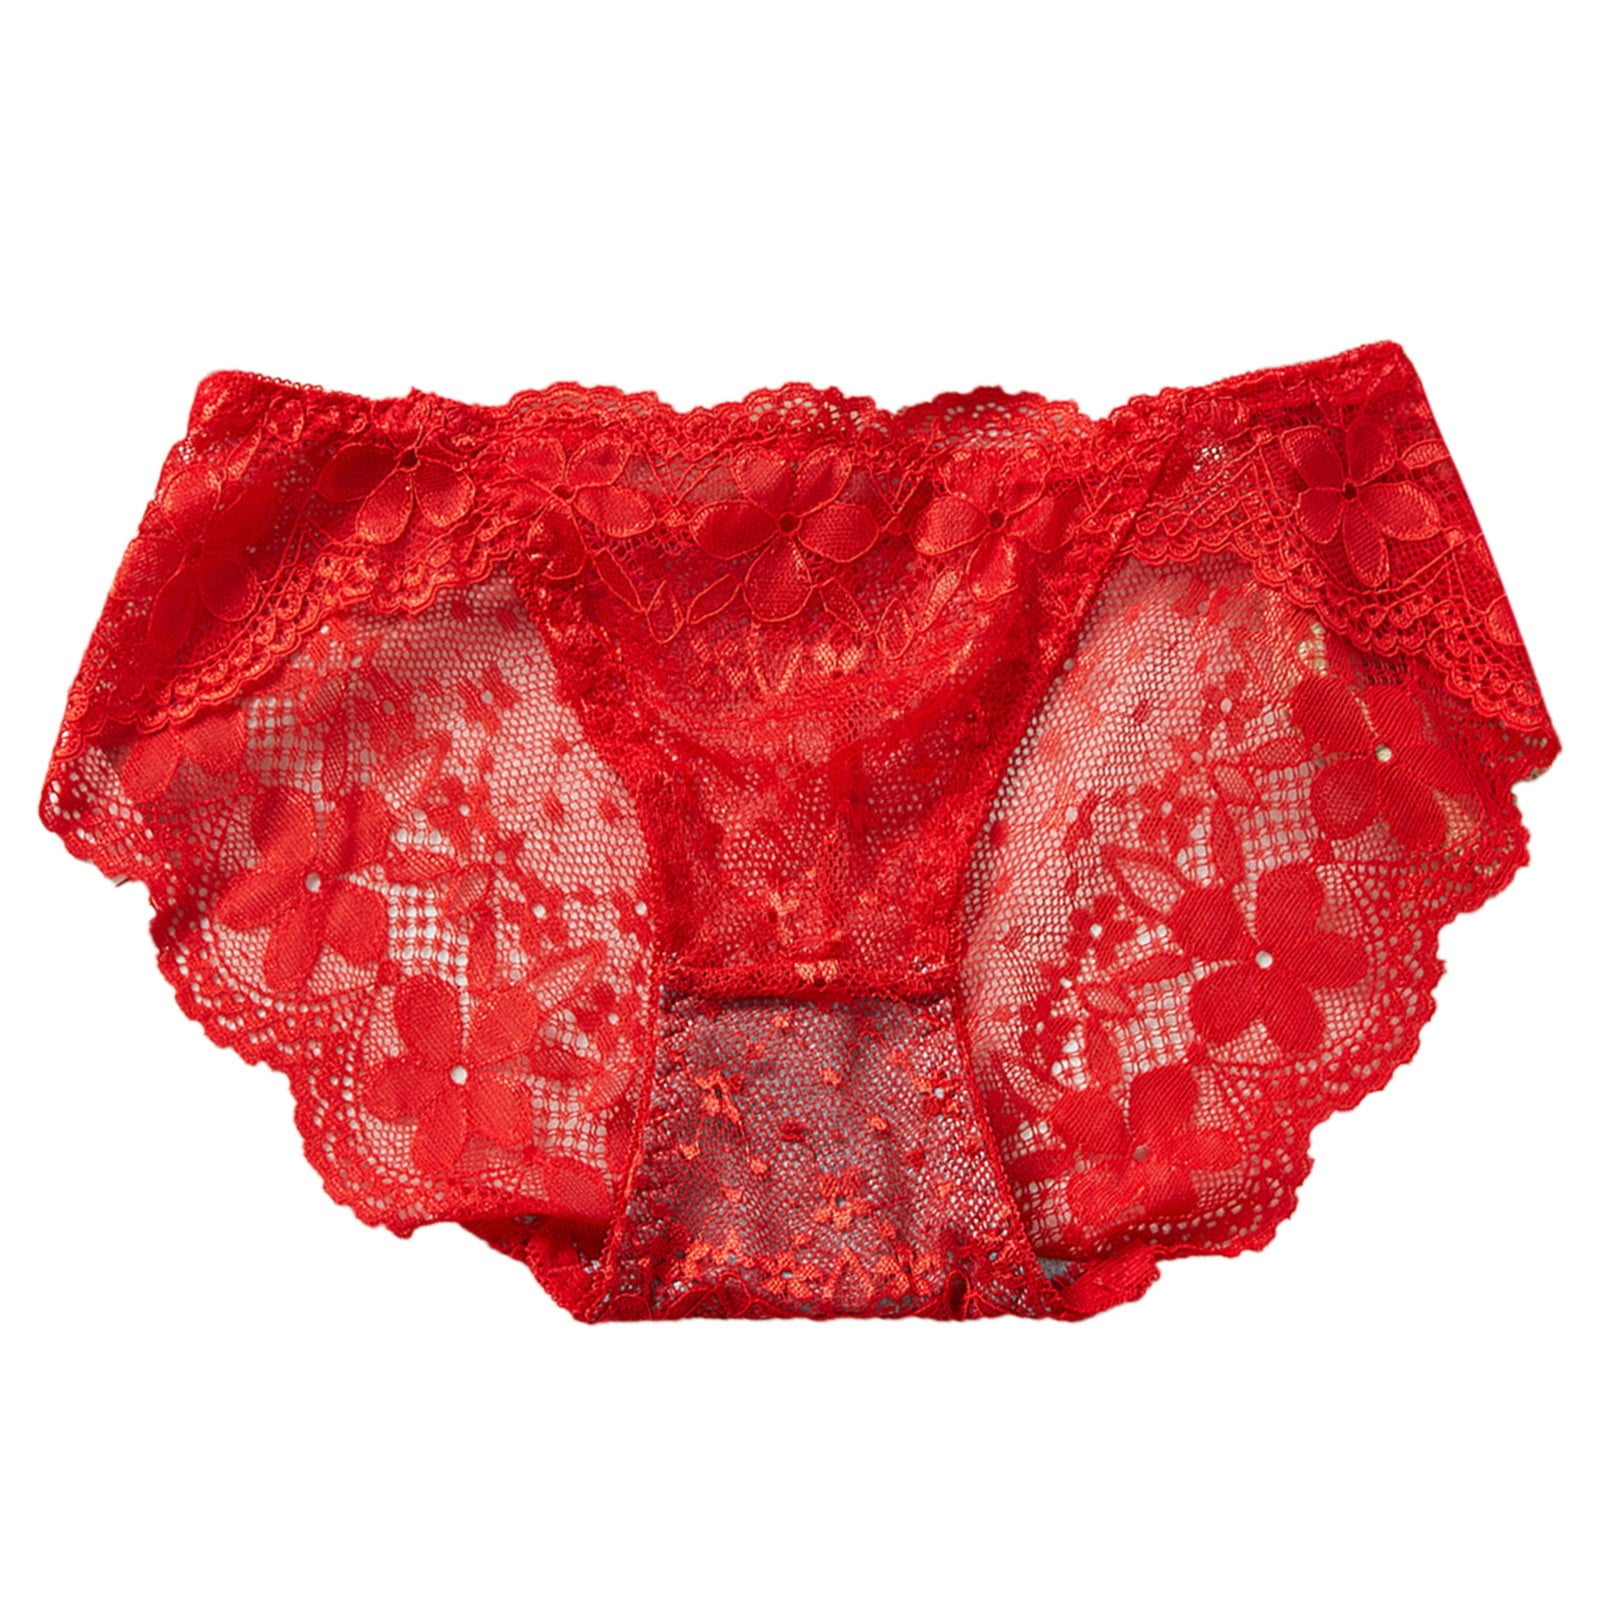 Comfortable Intimate Female Underpants Womens Red Lace Breathable Lace  Hollow Out And Raise The Pure Brief Panties 